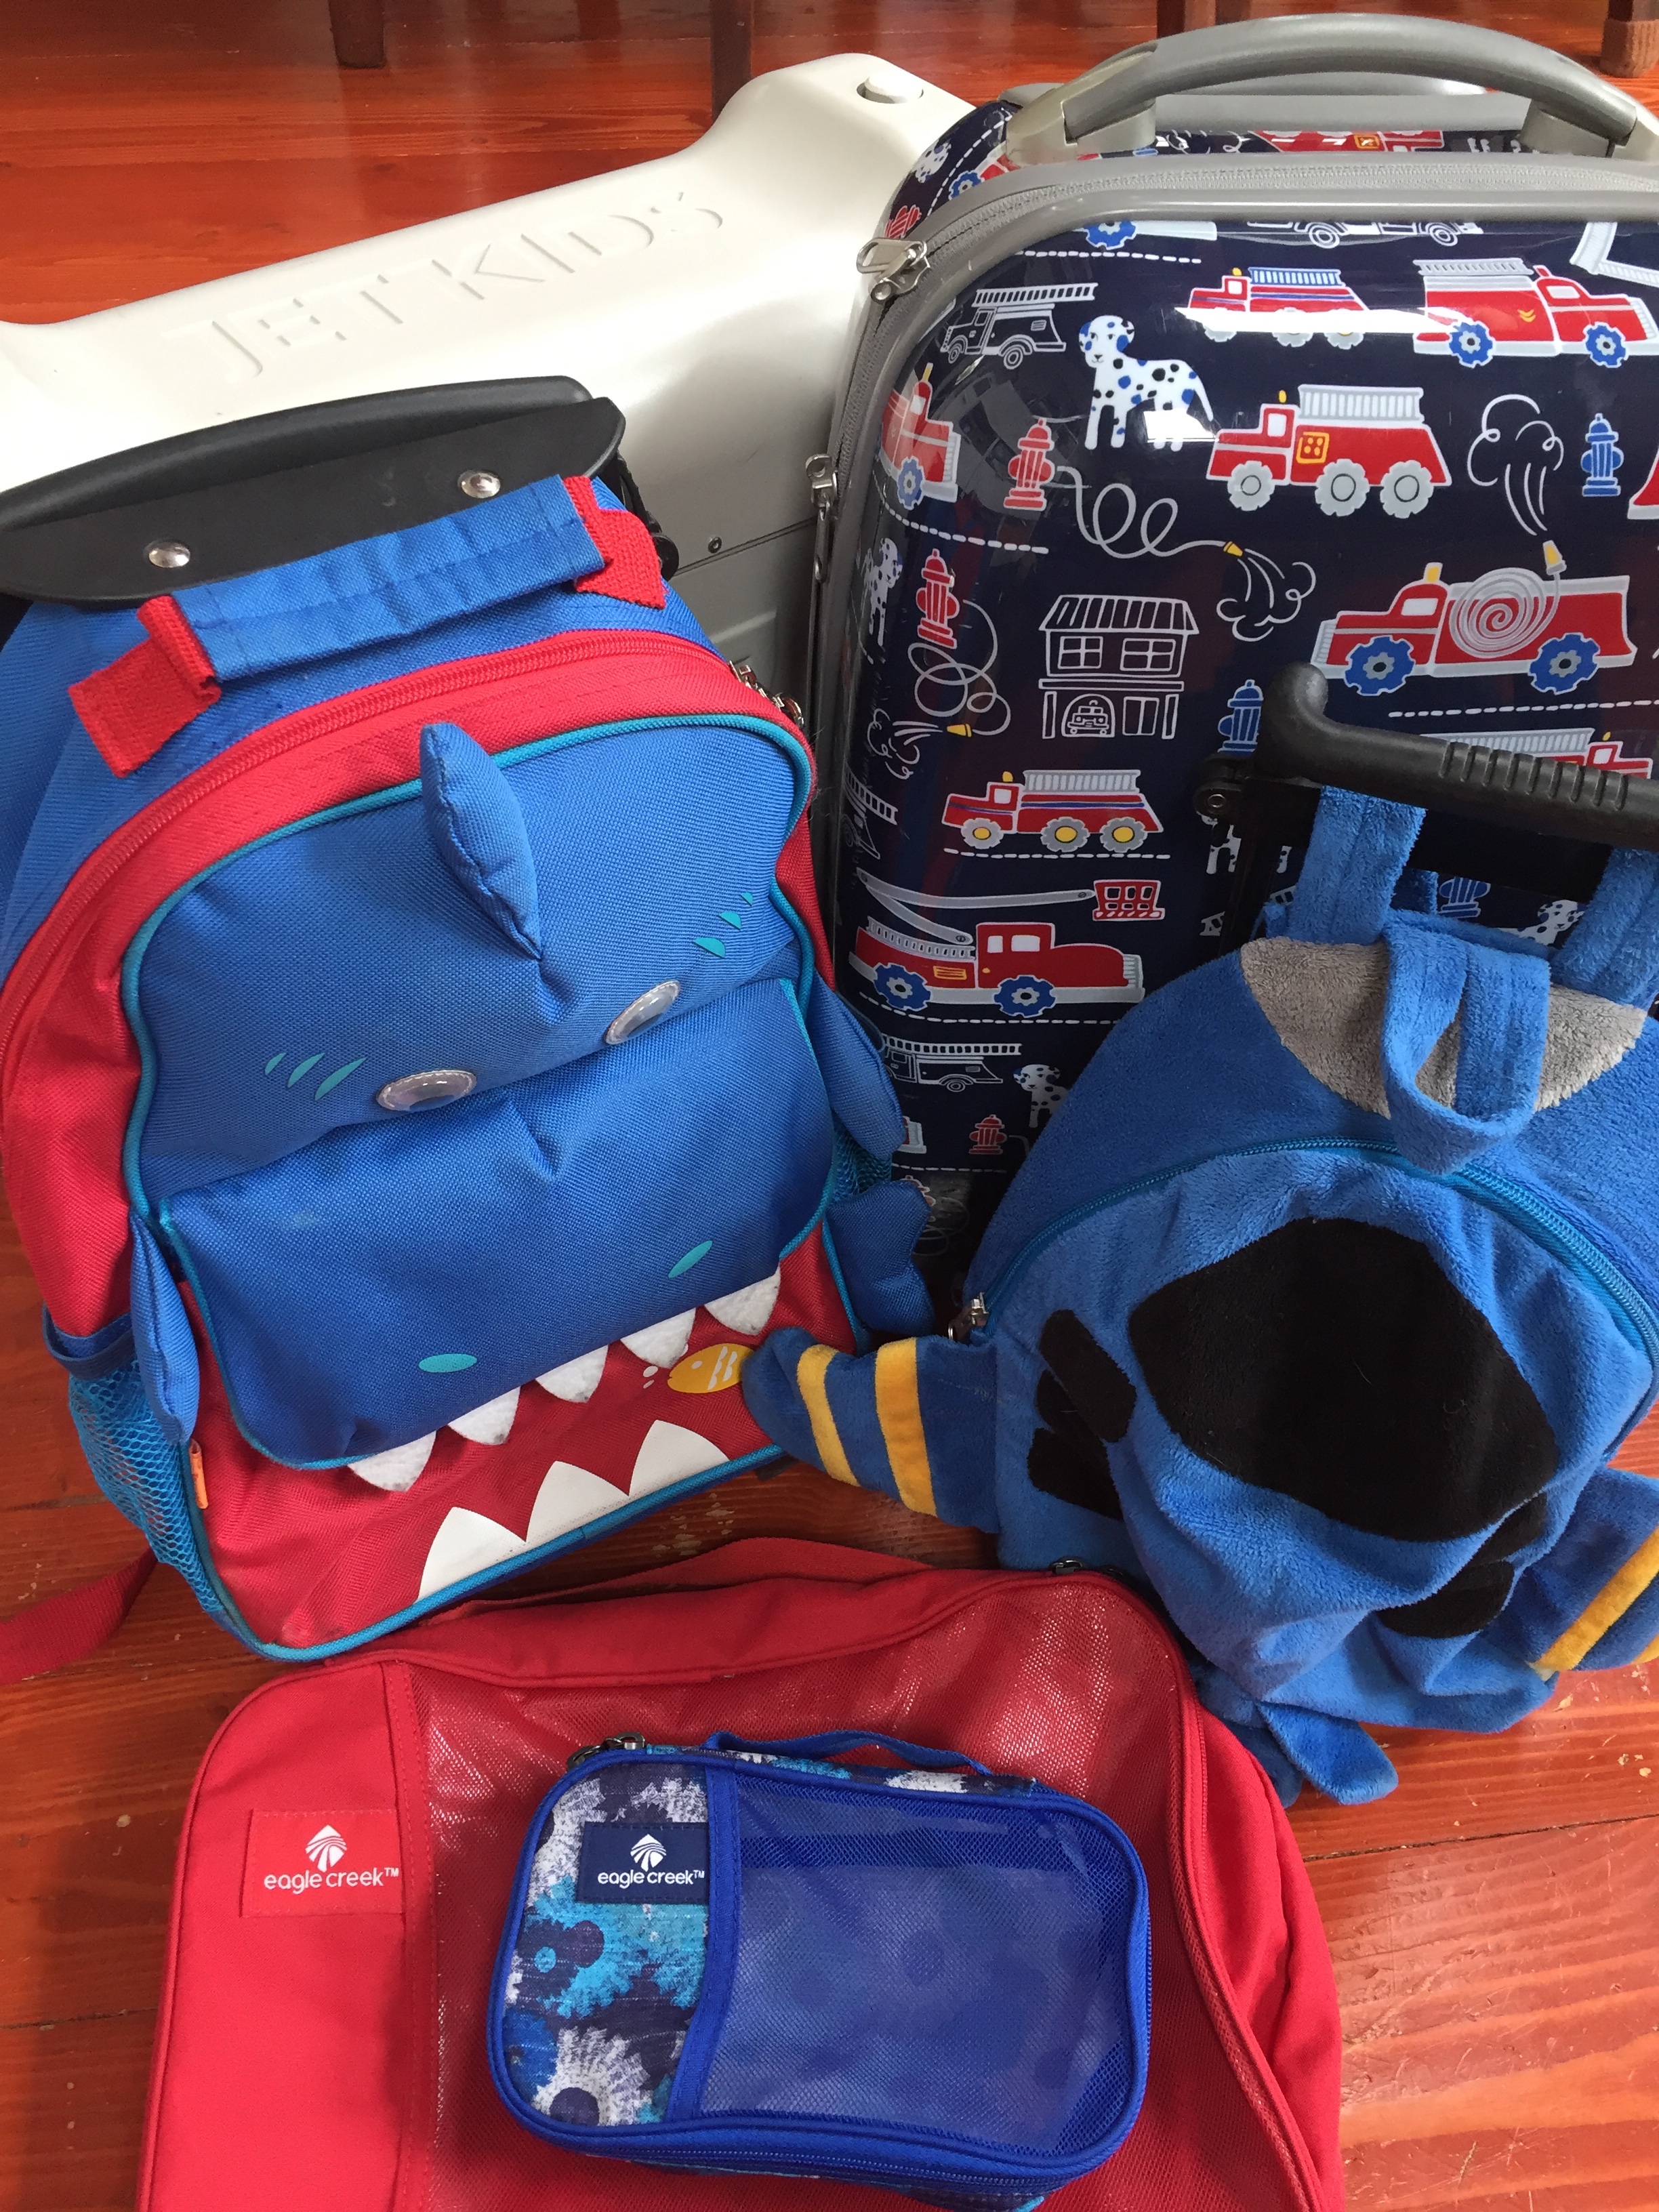 JetKids BedBox Yodo Kids Rolling Suitcase Pottery Barn Kids MacKenzie Spinner Luggage Backpack Suitcase Eagle Creek Pack It Cubes in blue and red